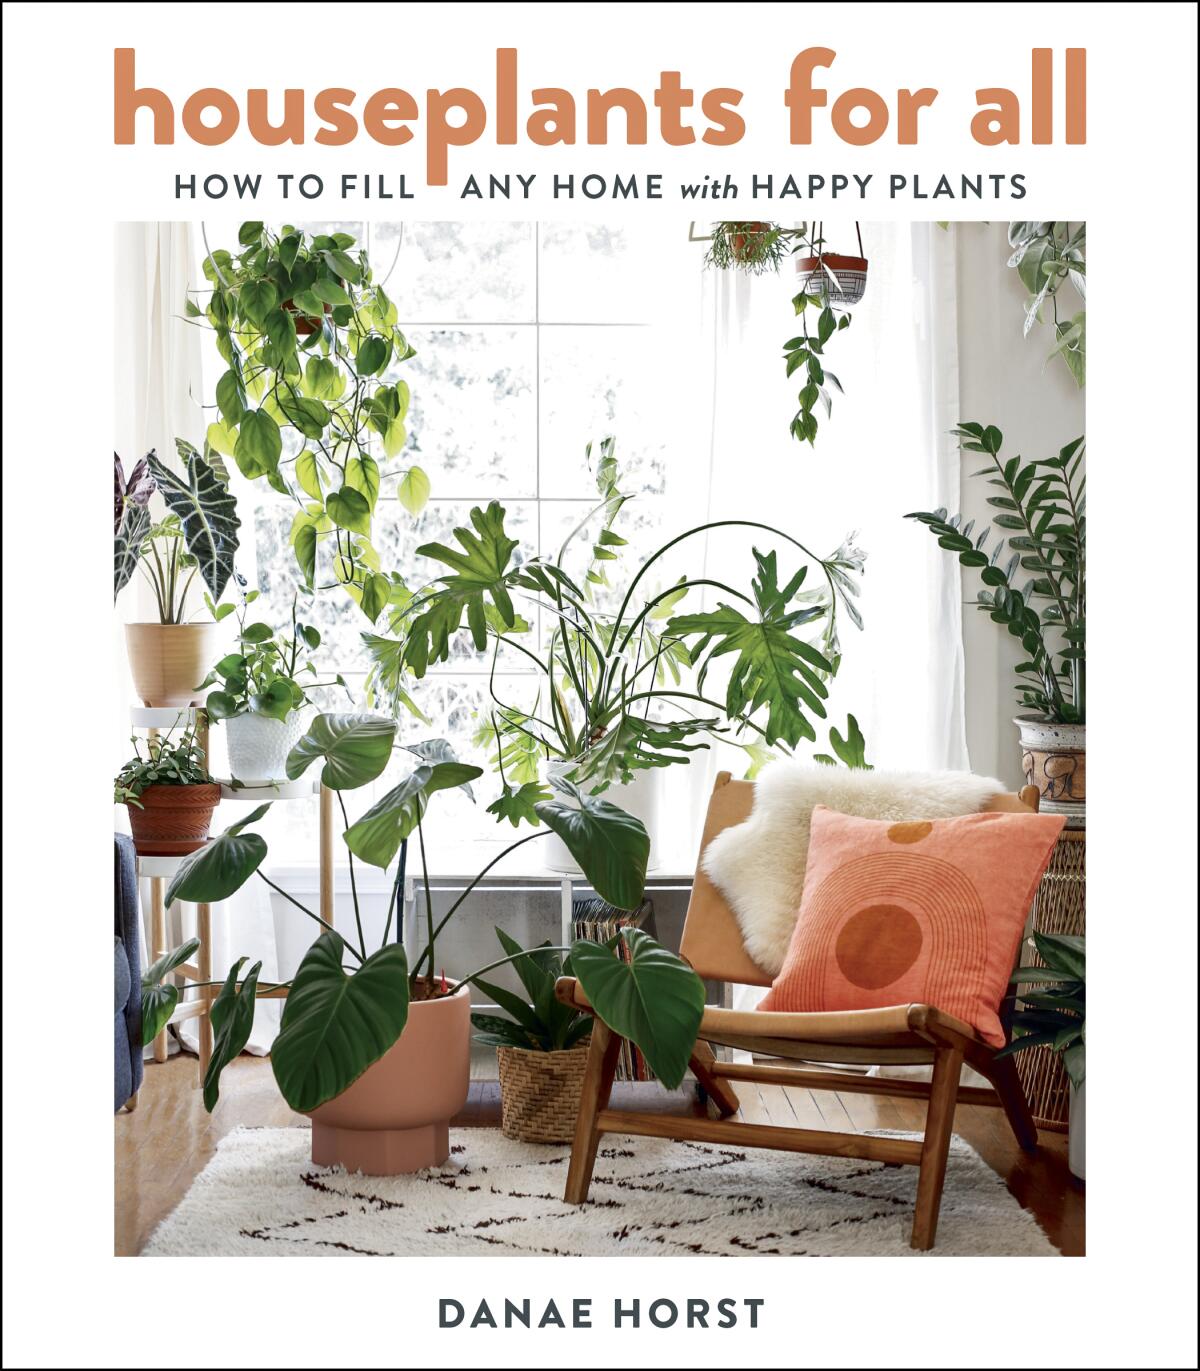 The book cover for "Houseplants for All: How To Fill Any Home With Happy Plants" by Danae Horst.